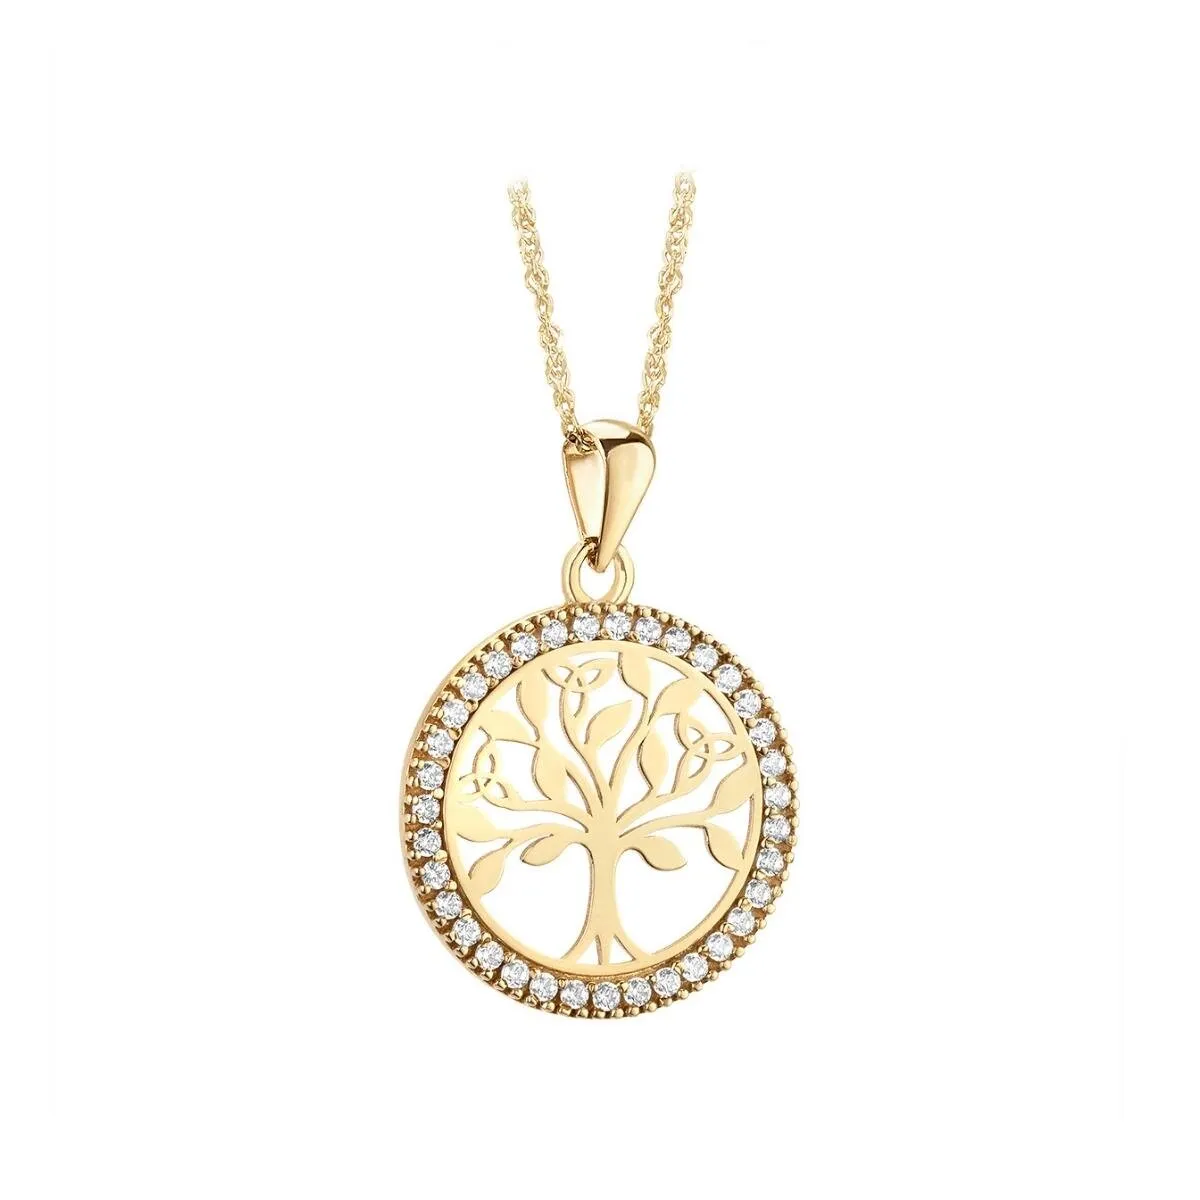 10k Gold Tree Of Life Necklace with Cubic Zirconia Stones...